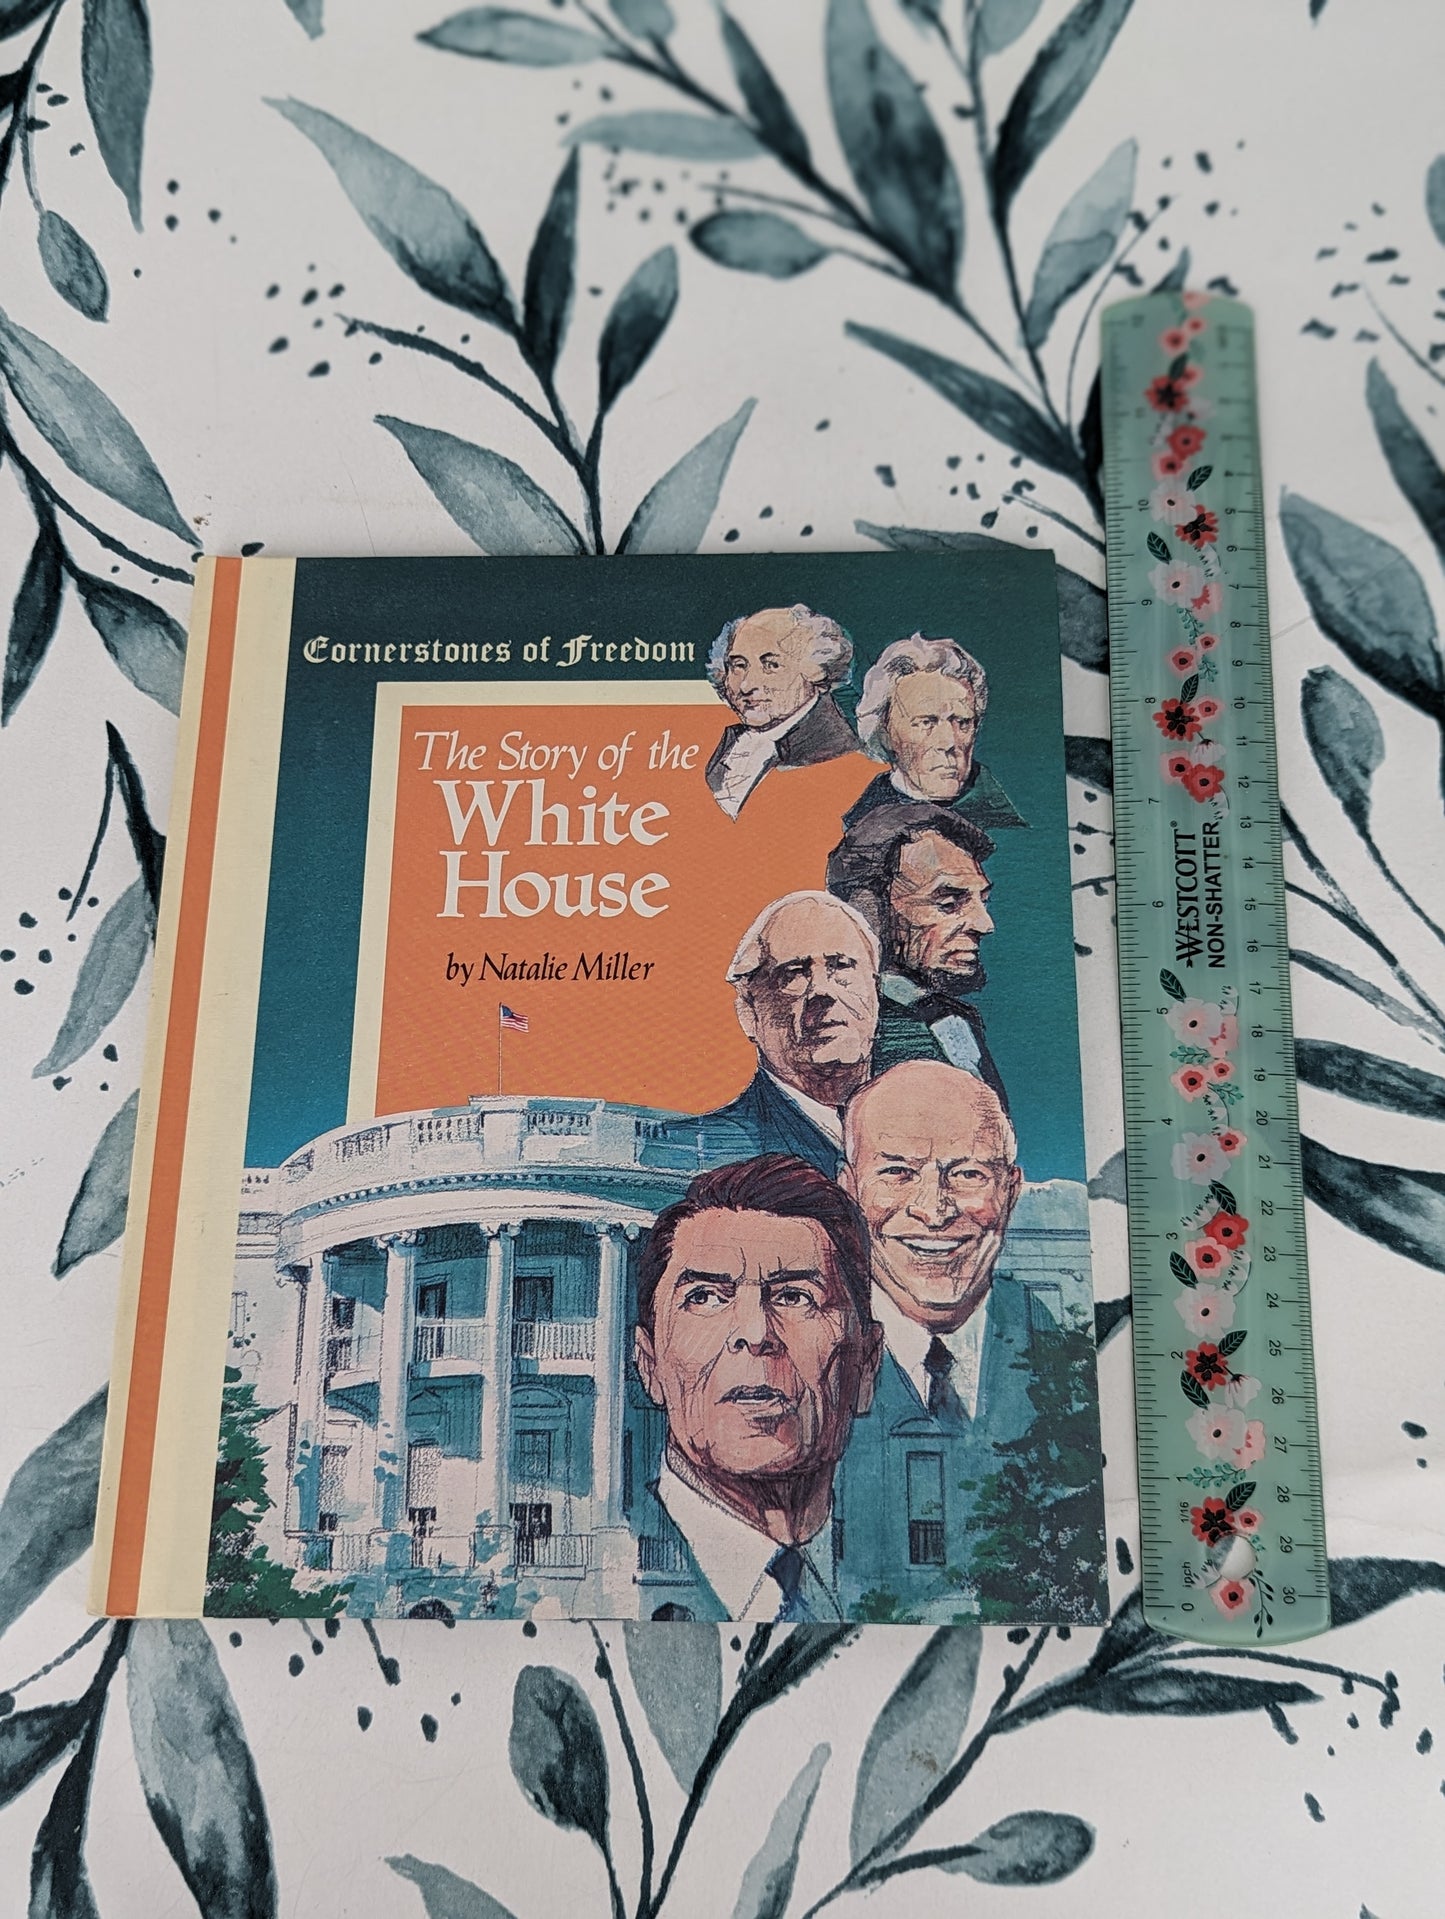 Cornerstones of Freedom: The Story of the White House